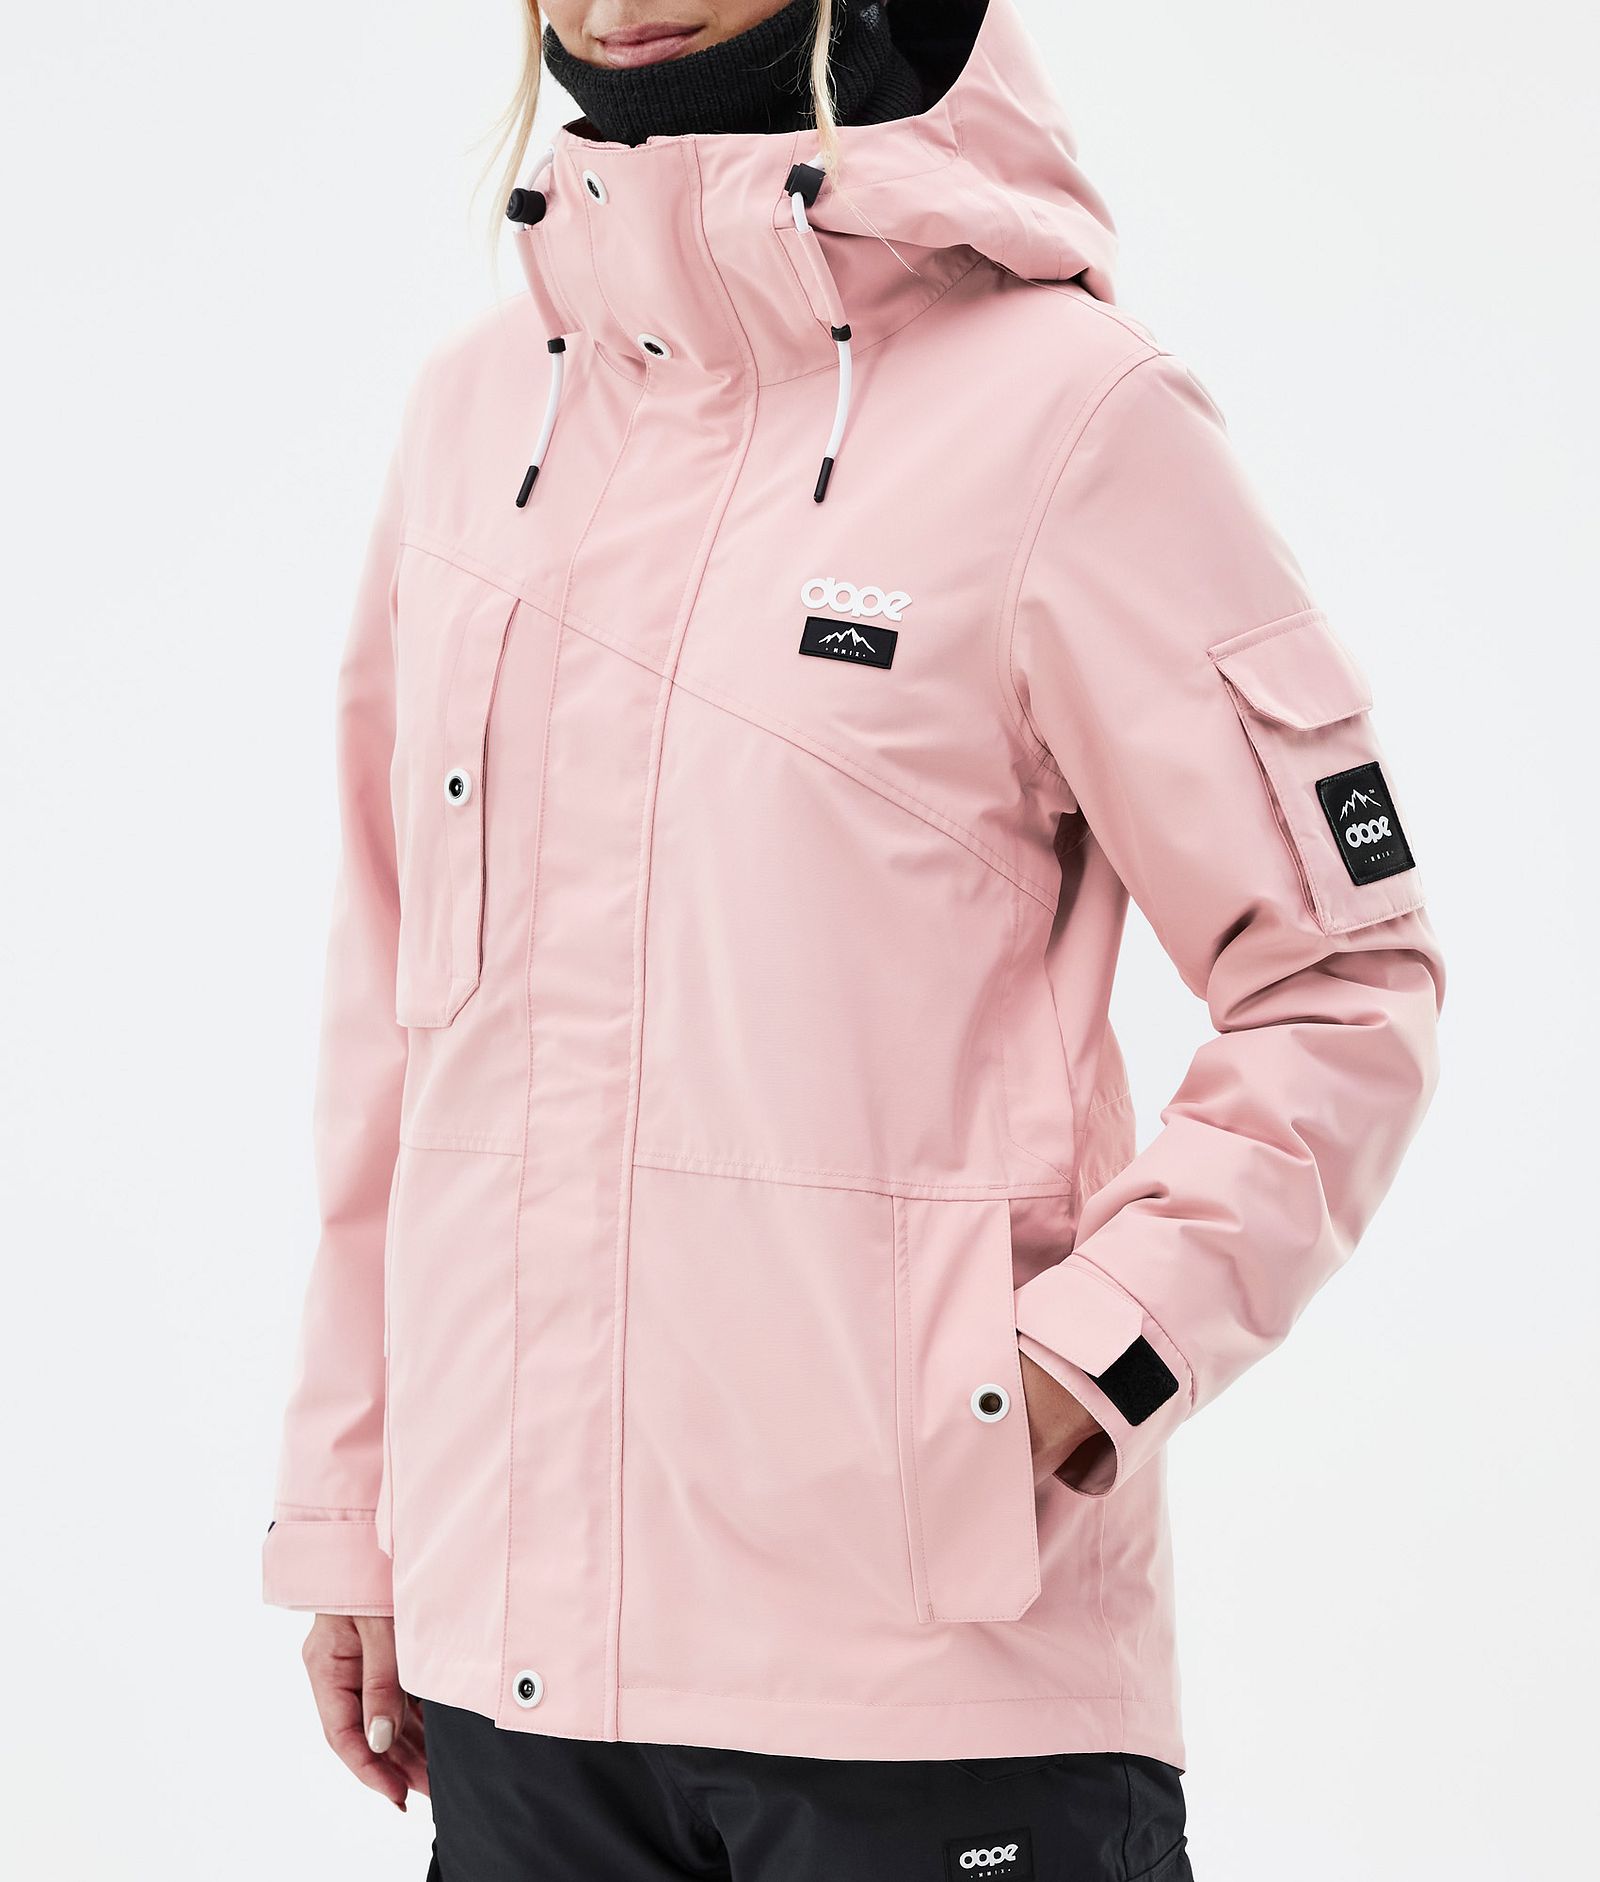 Dope Adept W Chaqueta Esquí Mujer Soft Pink